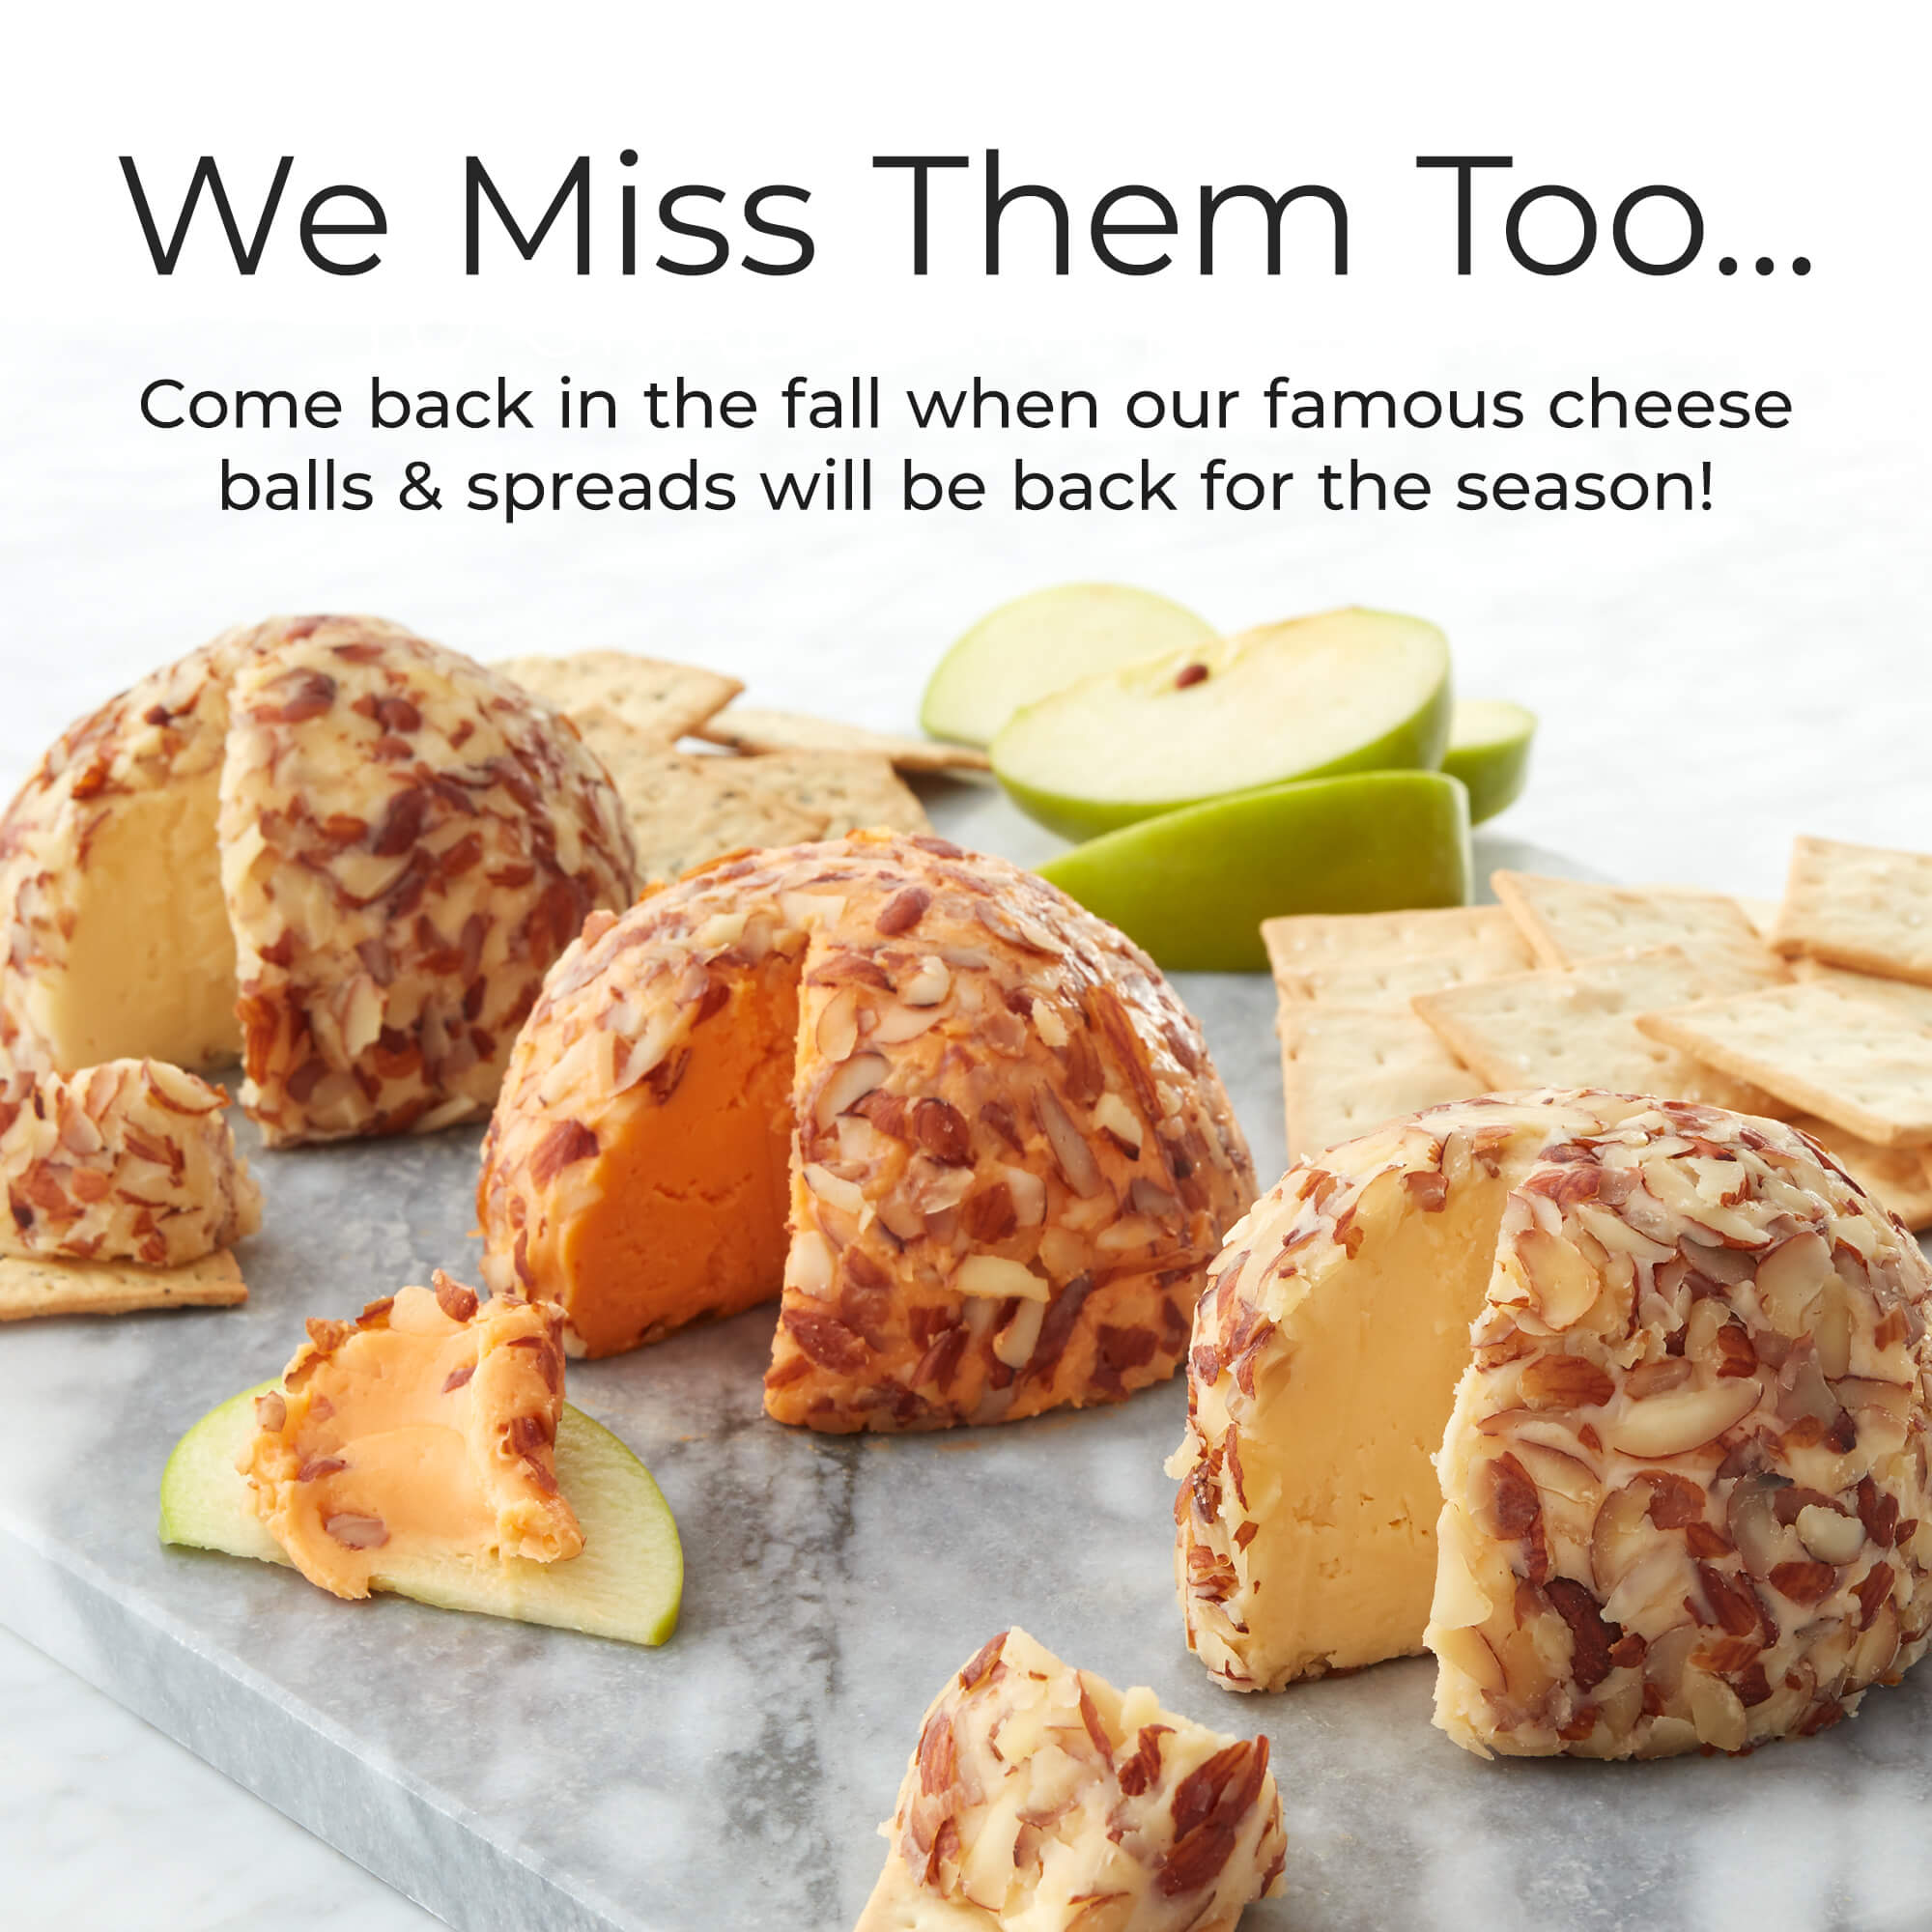 We miss them too...Come back in the fall when our famous cheese balls and spreads will be back for the season.